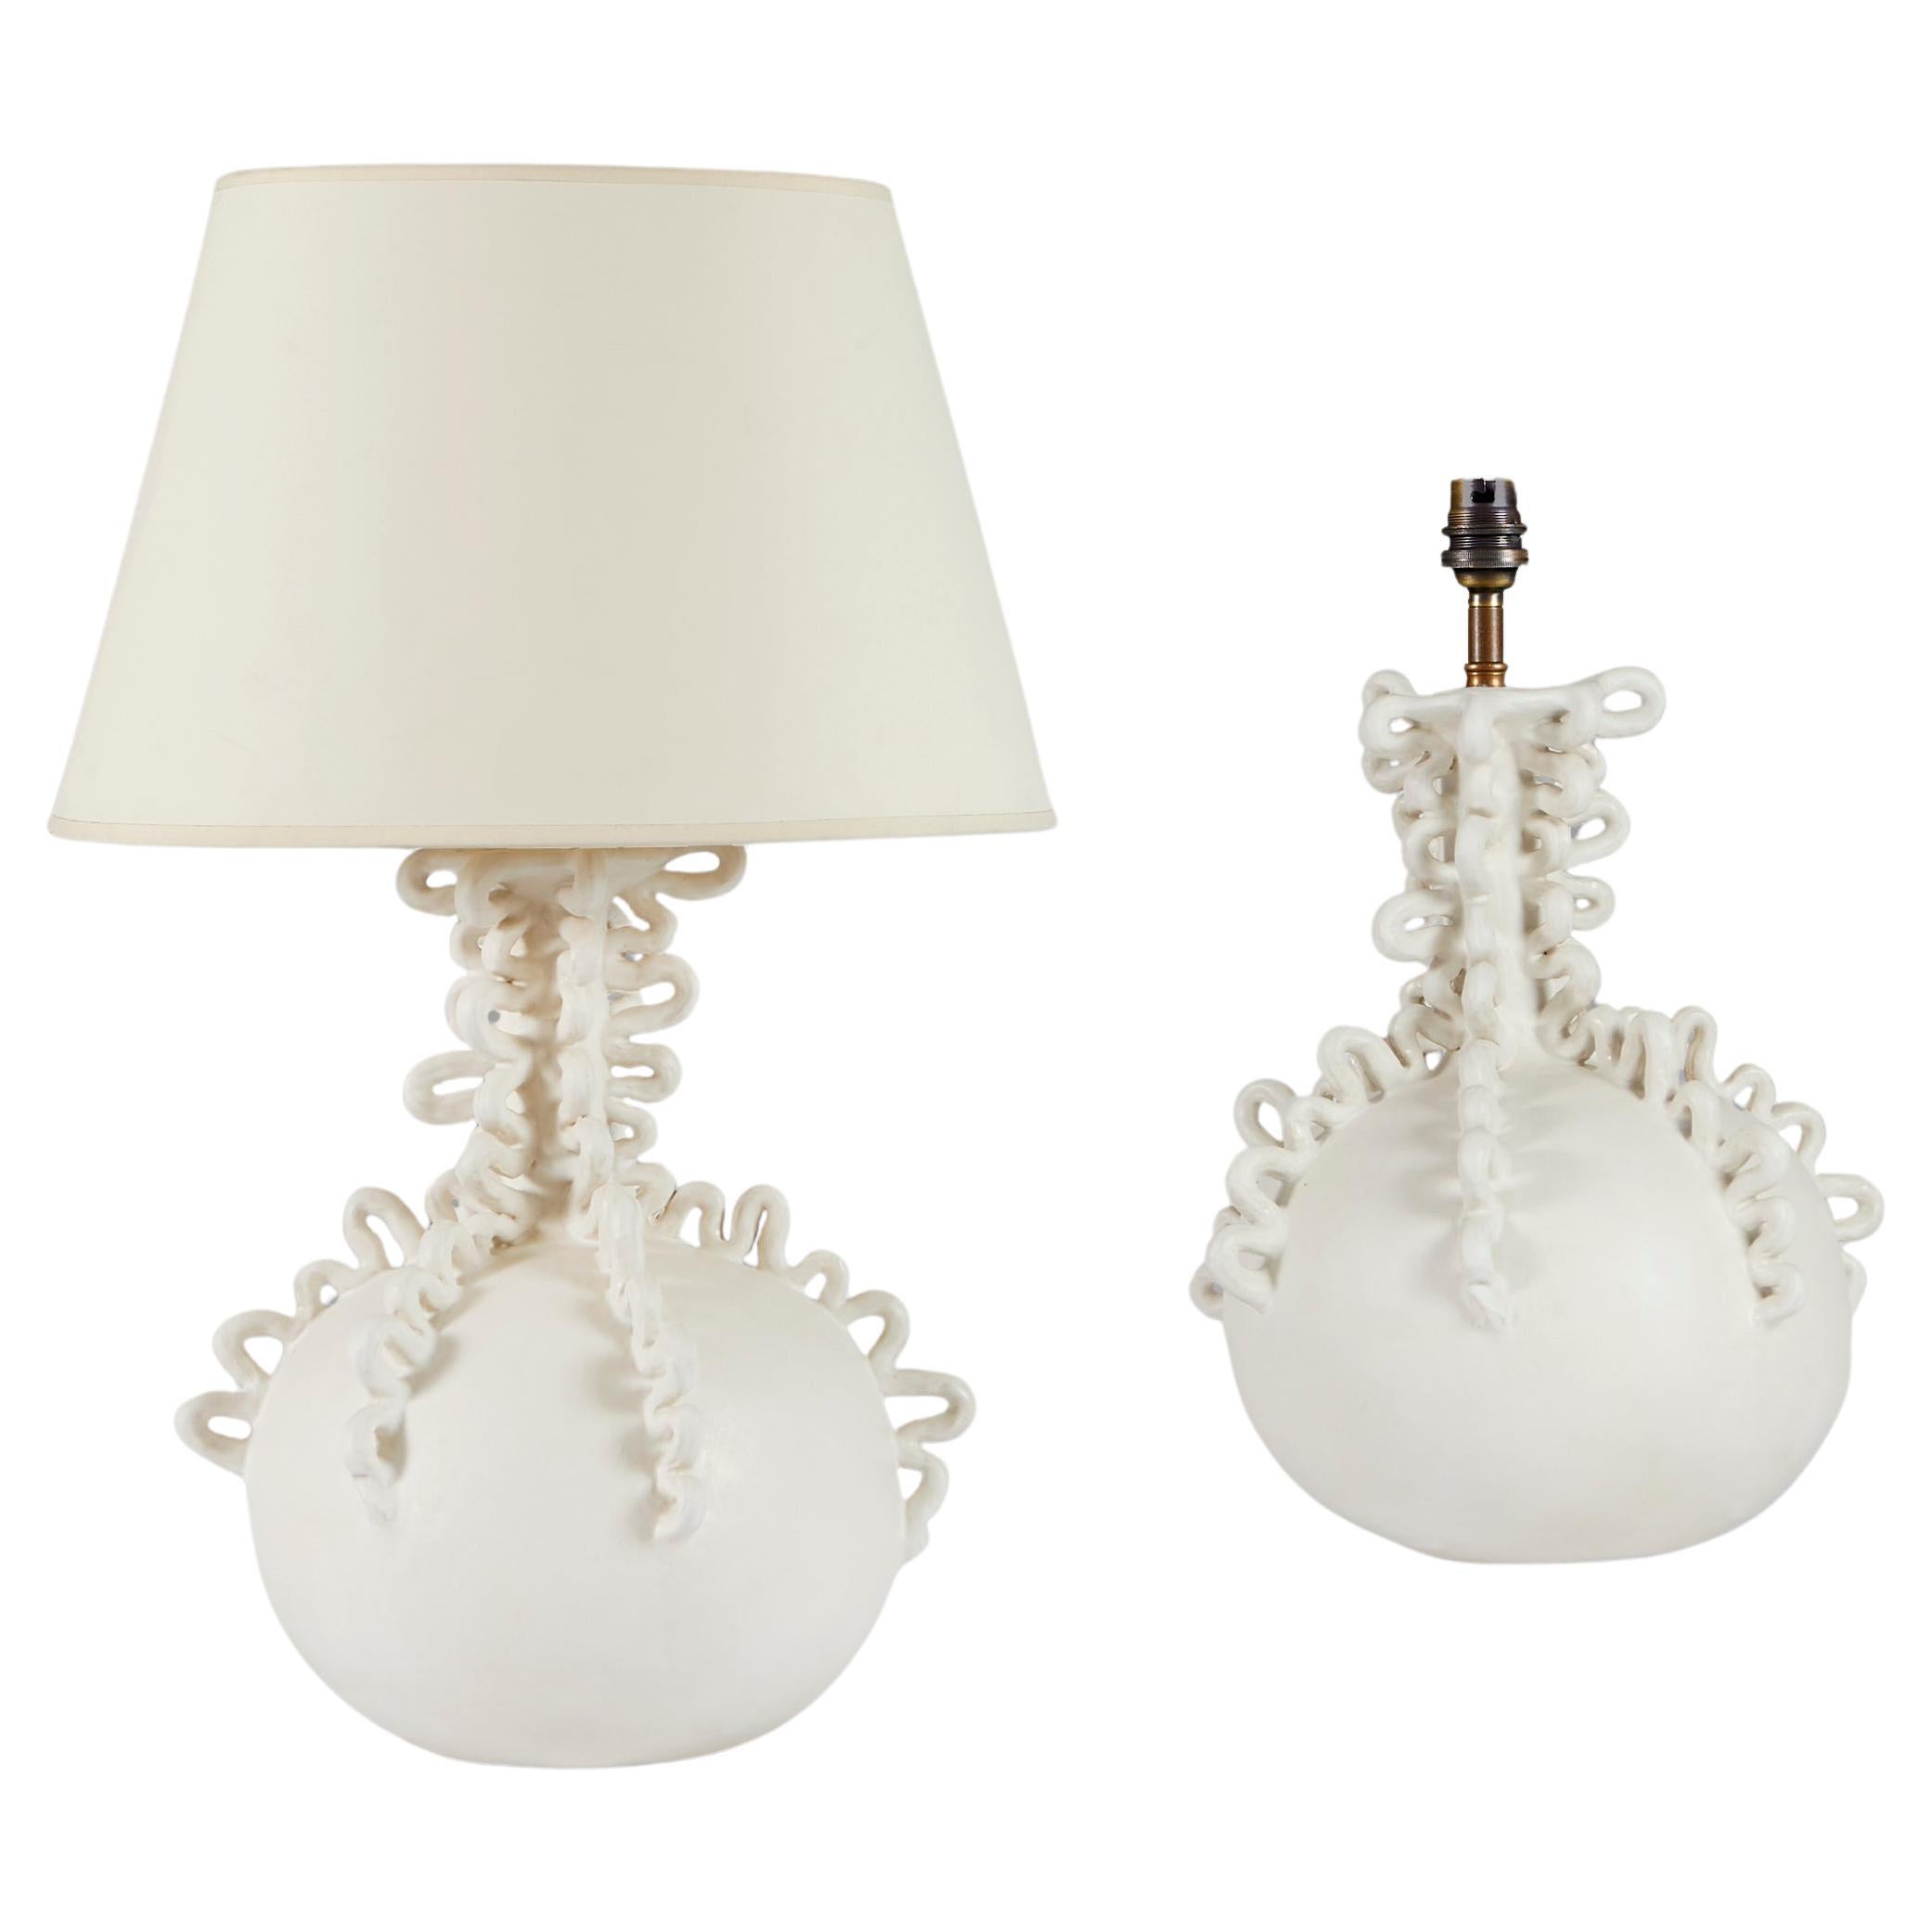 A Pair of White Serpentine Abstract White Glaze Lamps  For Sale